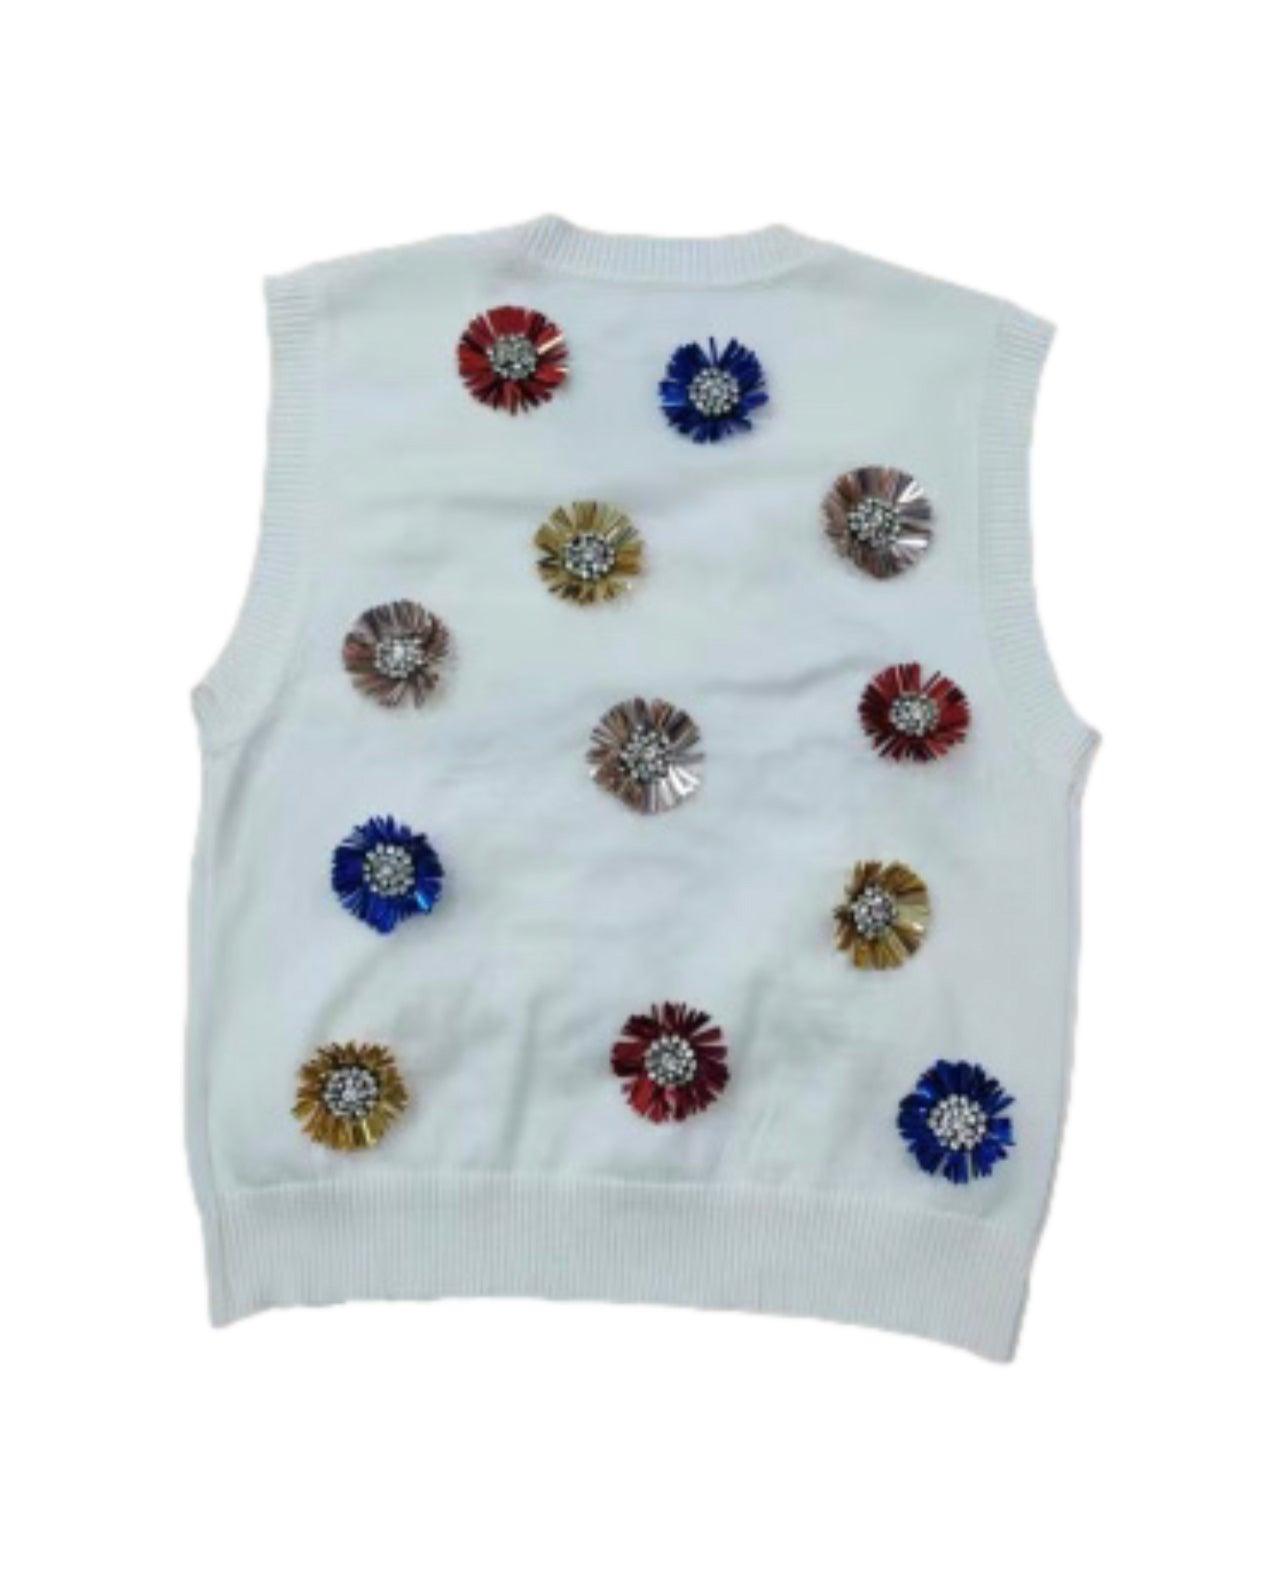 Queen of Sparklers Sweater Tank